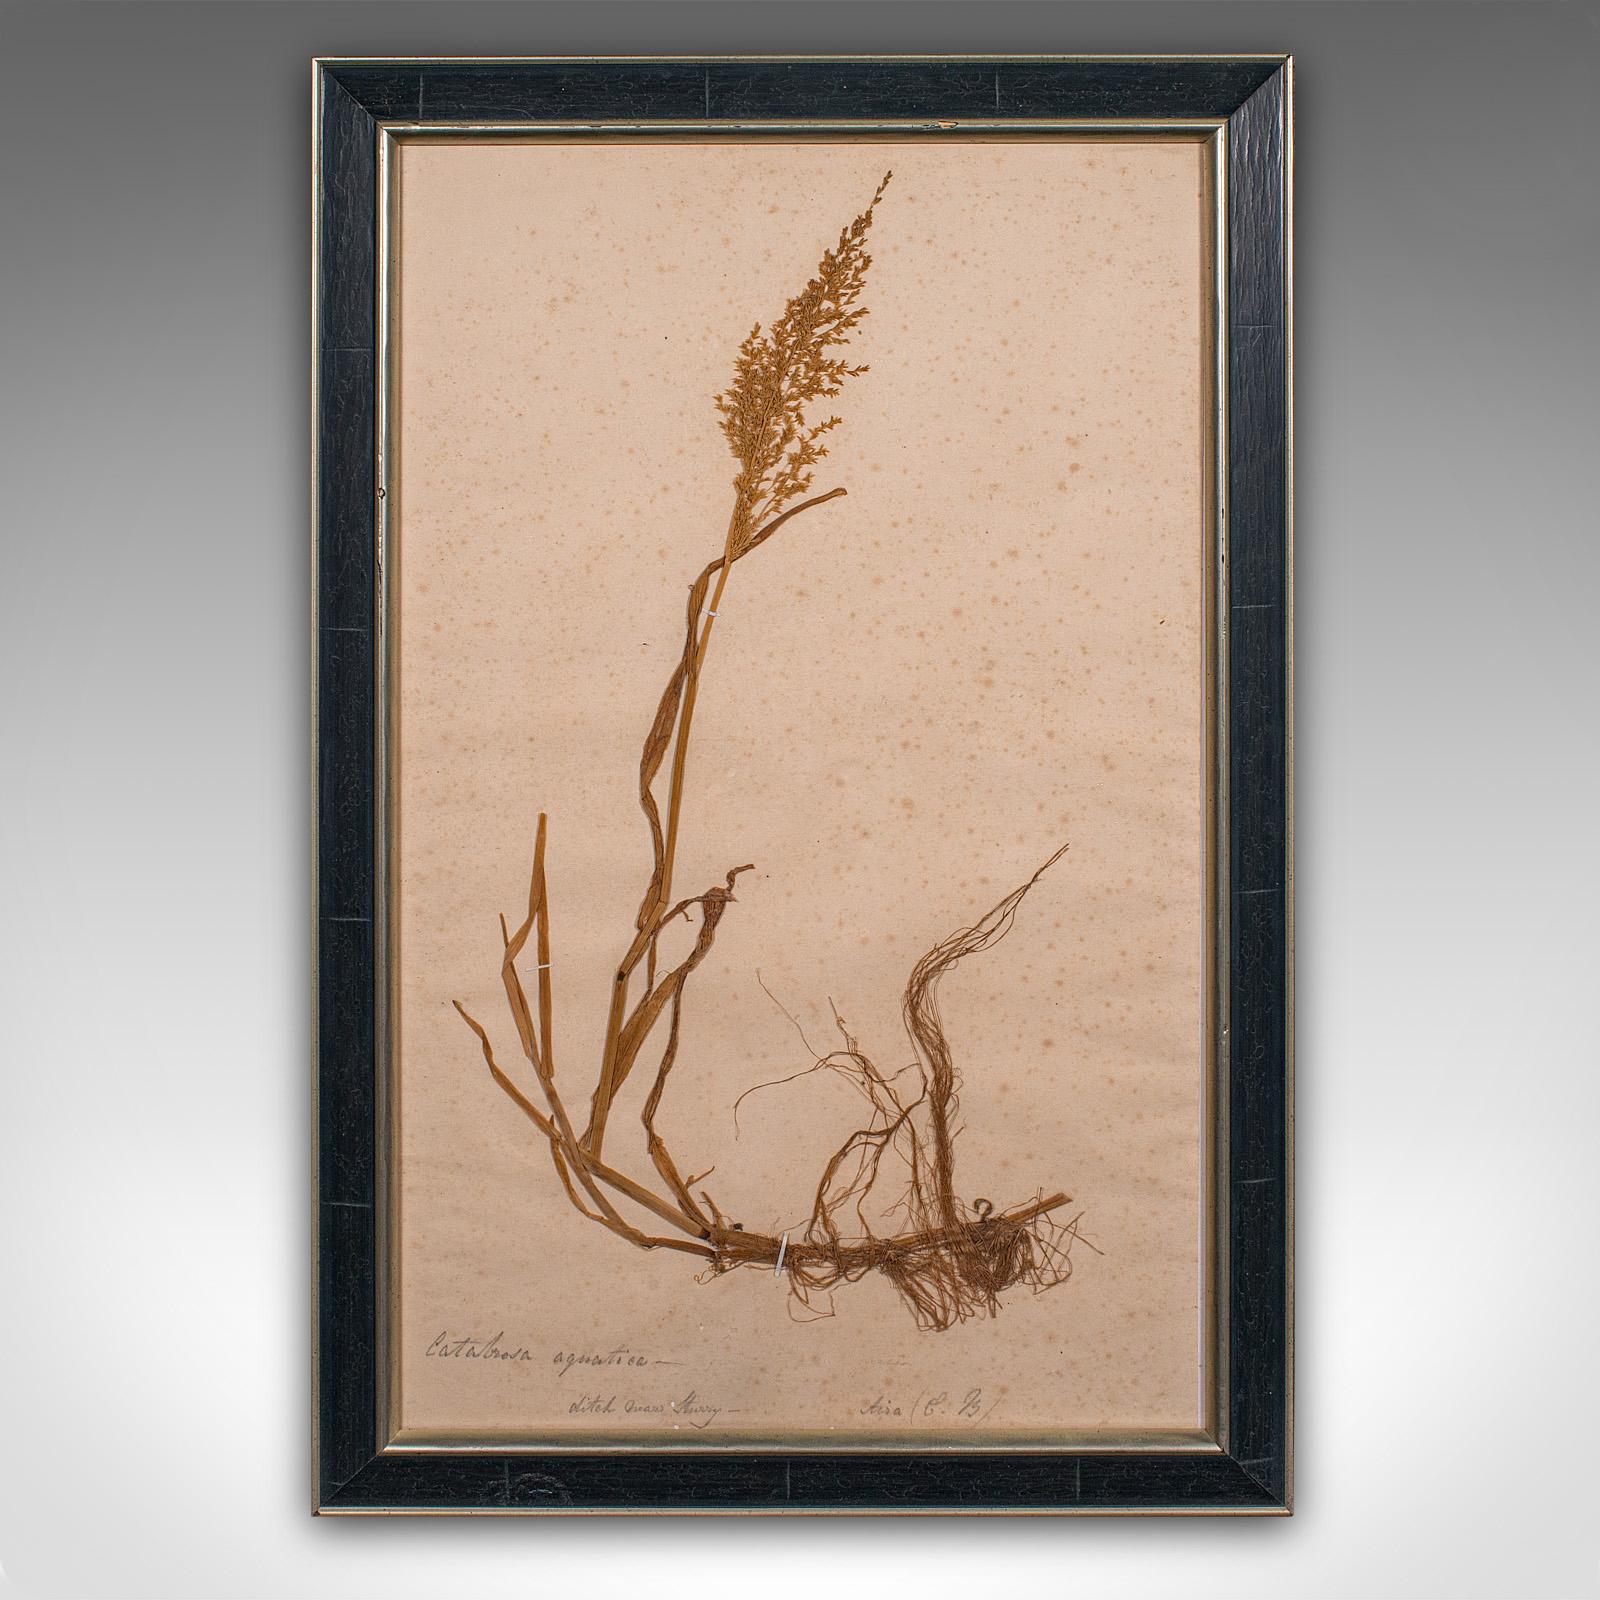 This is set of 6 antique botanist's specimens. An English, mounted dried grass display, dating to the mid Victorian period, circa 1850.

Nicely preserved mid 19th century plant life, with appealing presentation
Displaying a desirable aged patina and